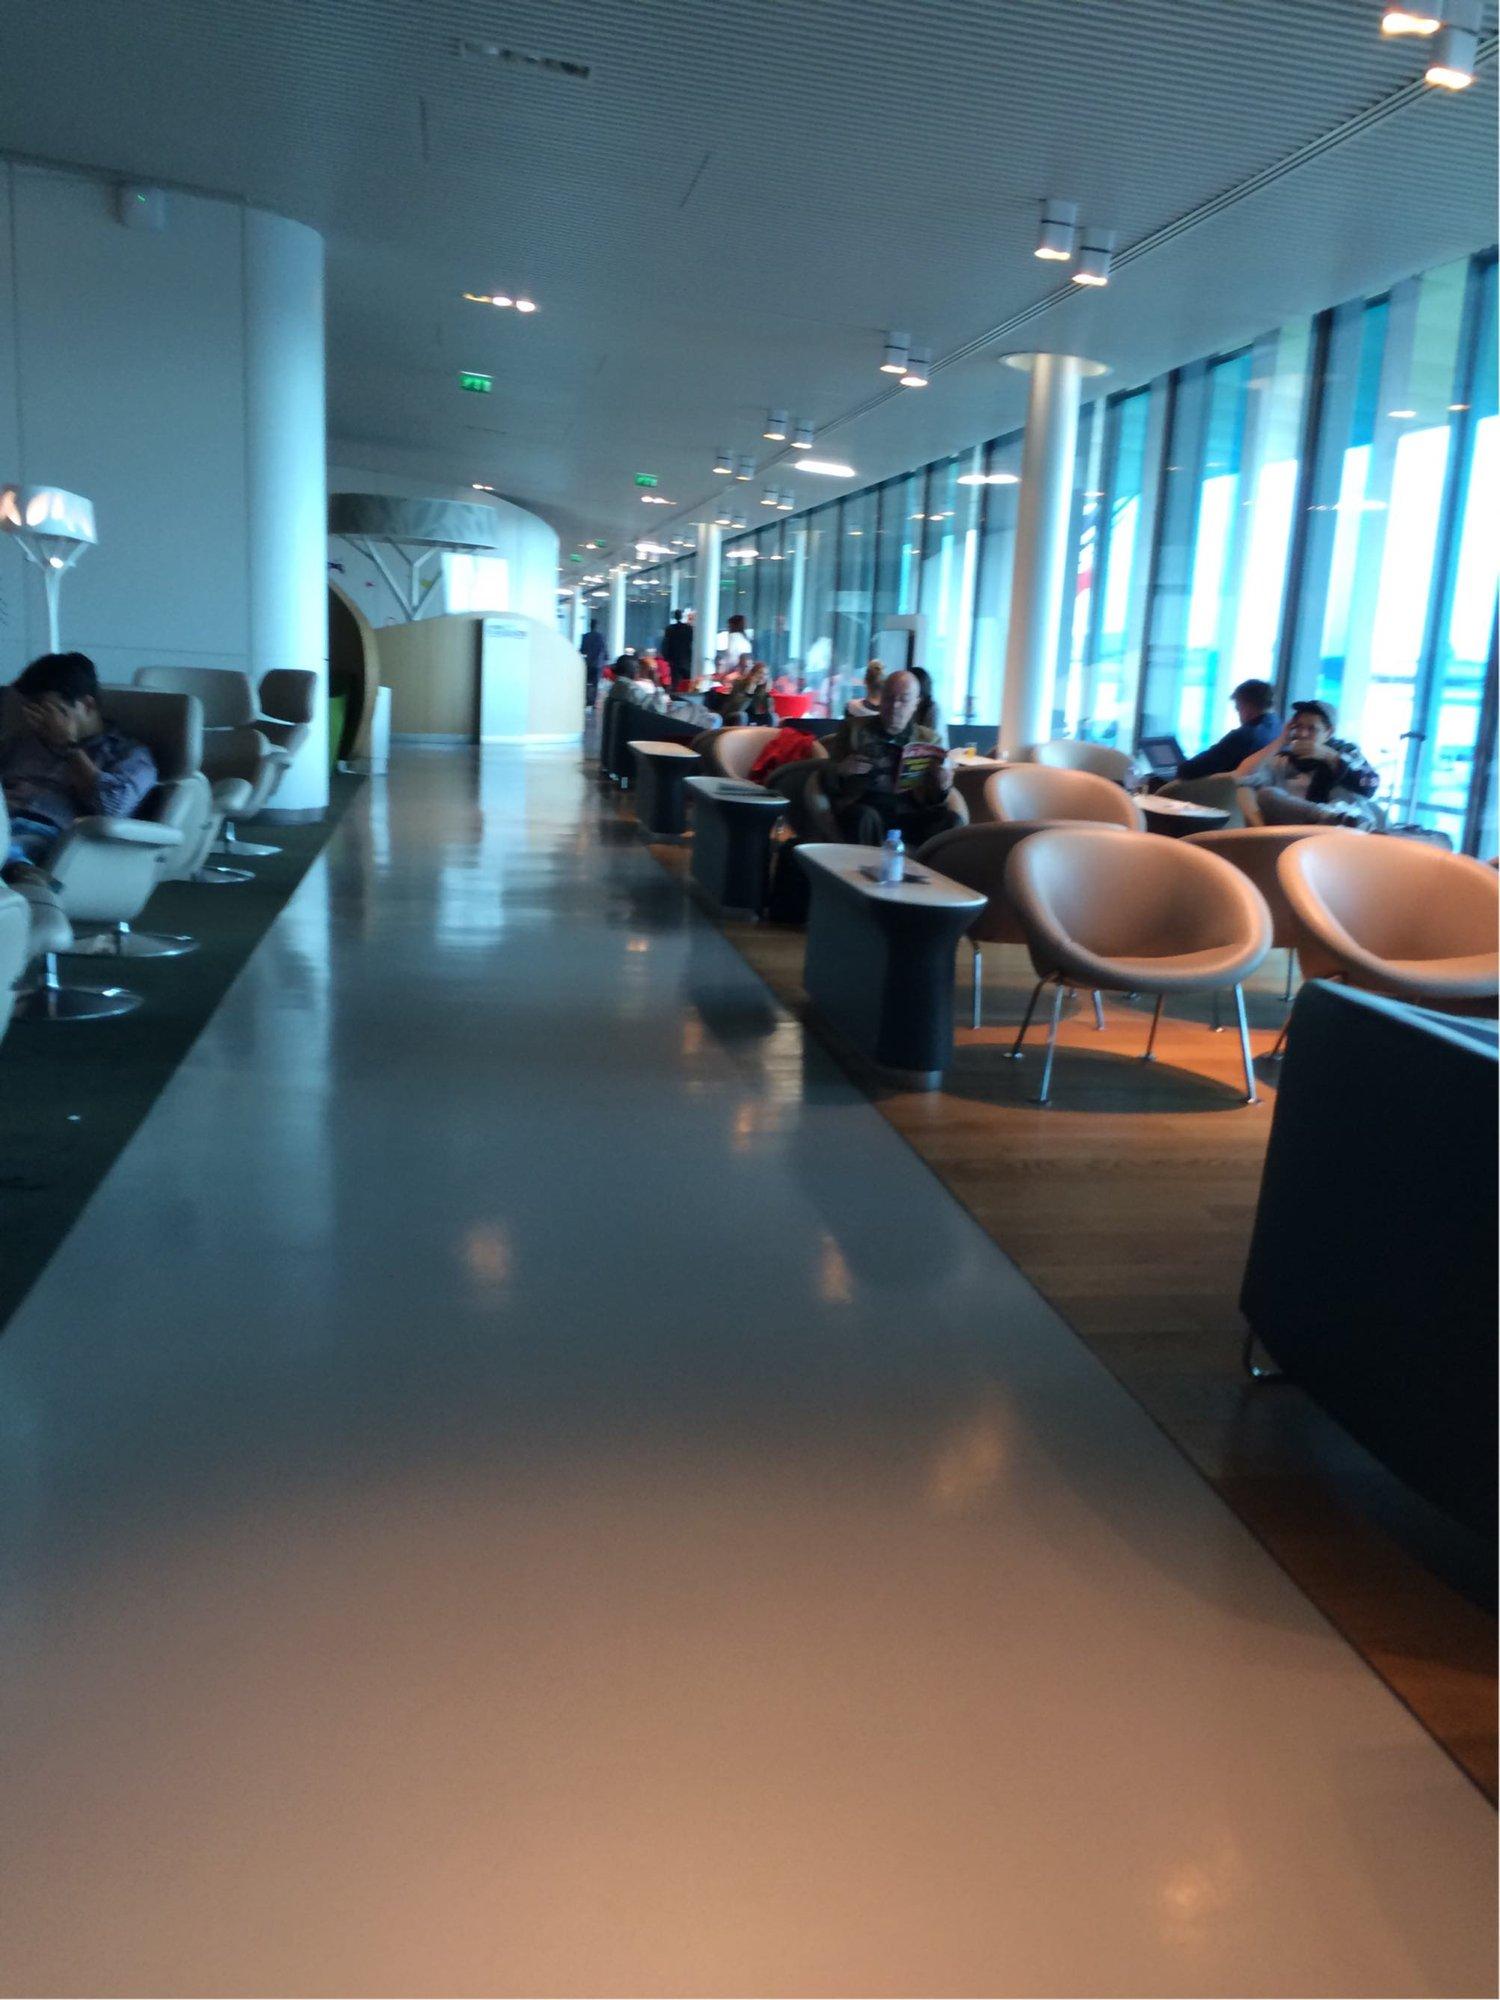 Air France Lounge (Concourse M) image 14 of 17